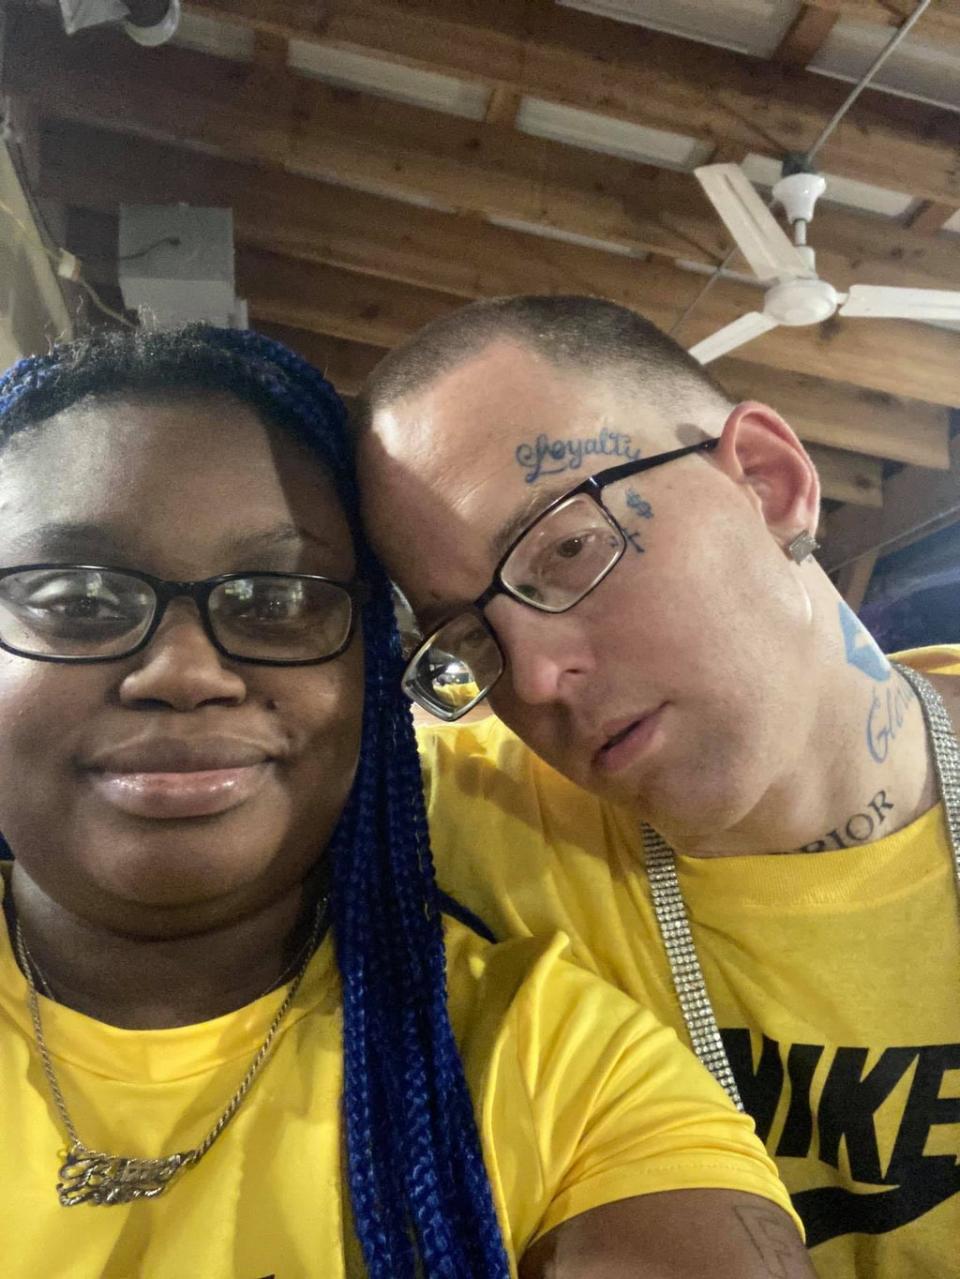 Gloria Williams and Brian Coulter in a photo on her Facebook. Officials said they had been in a relationship for years (Facebook)